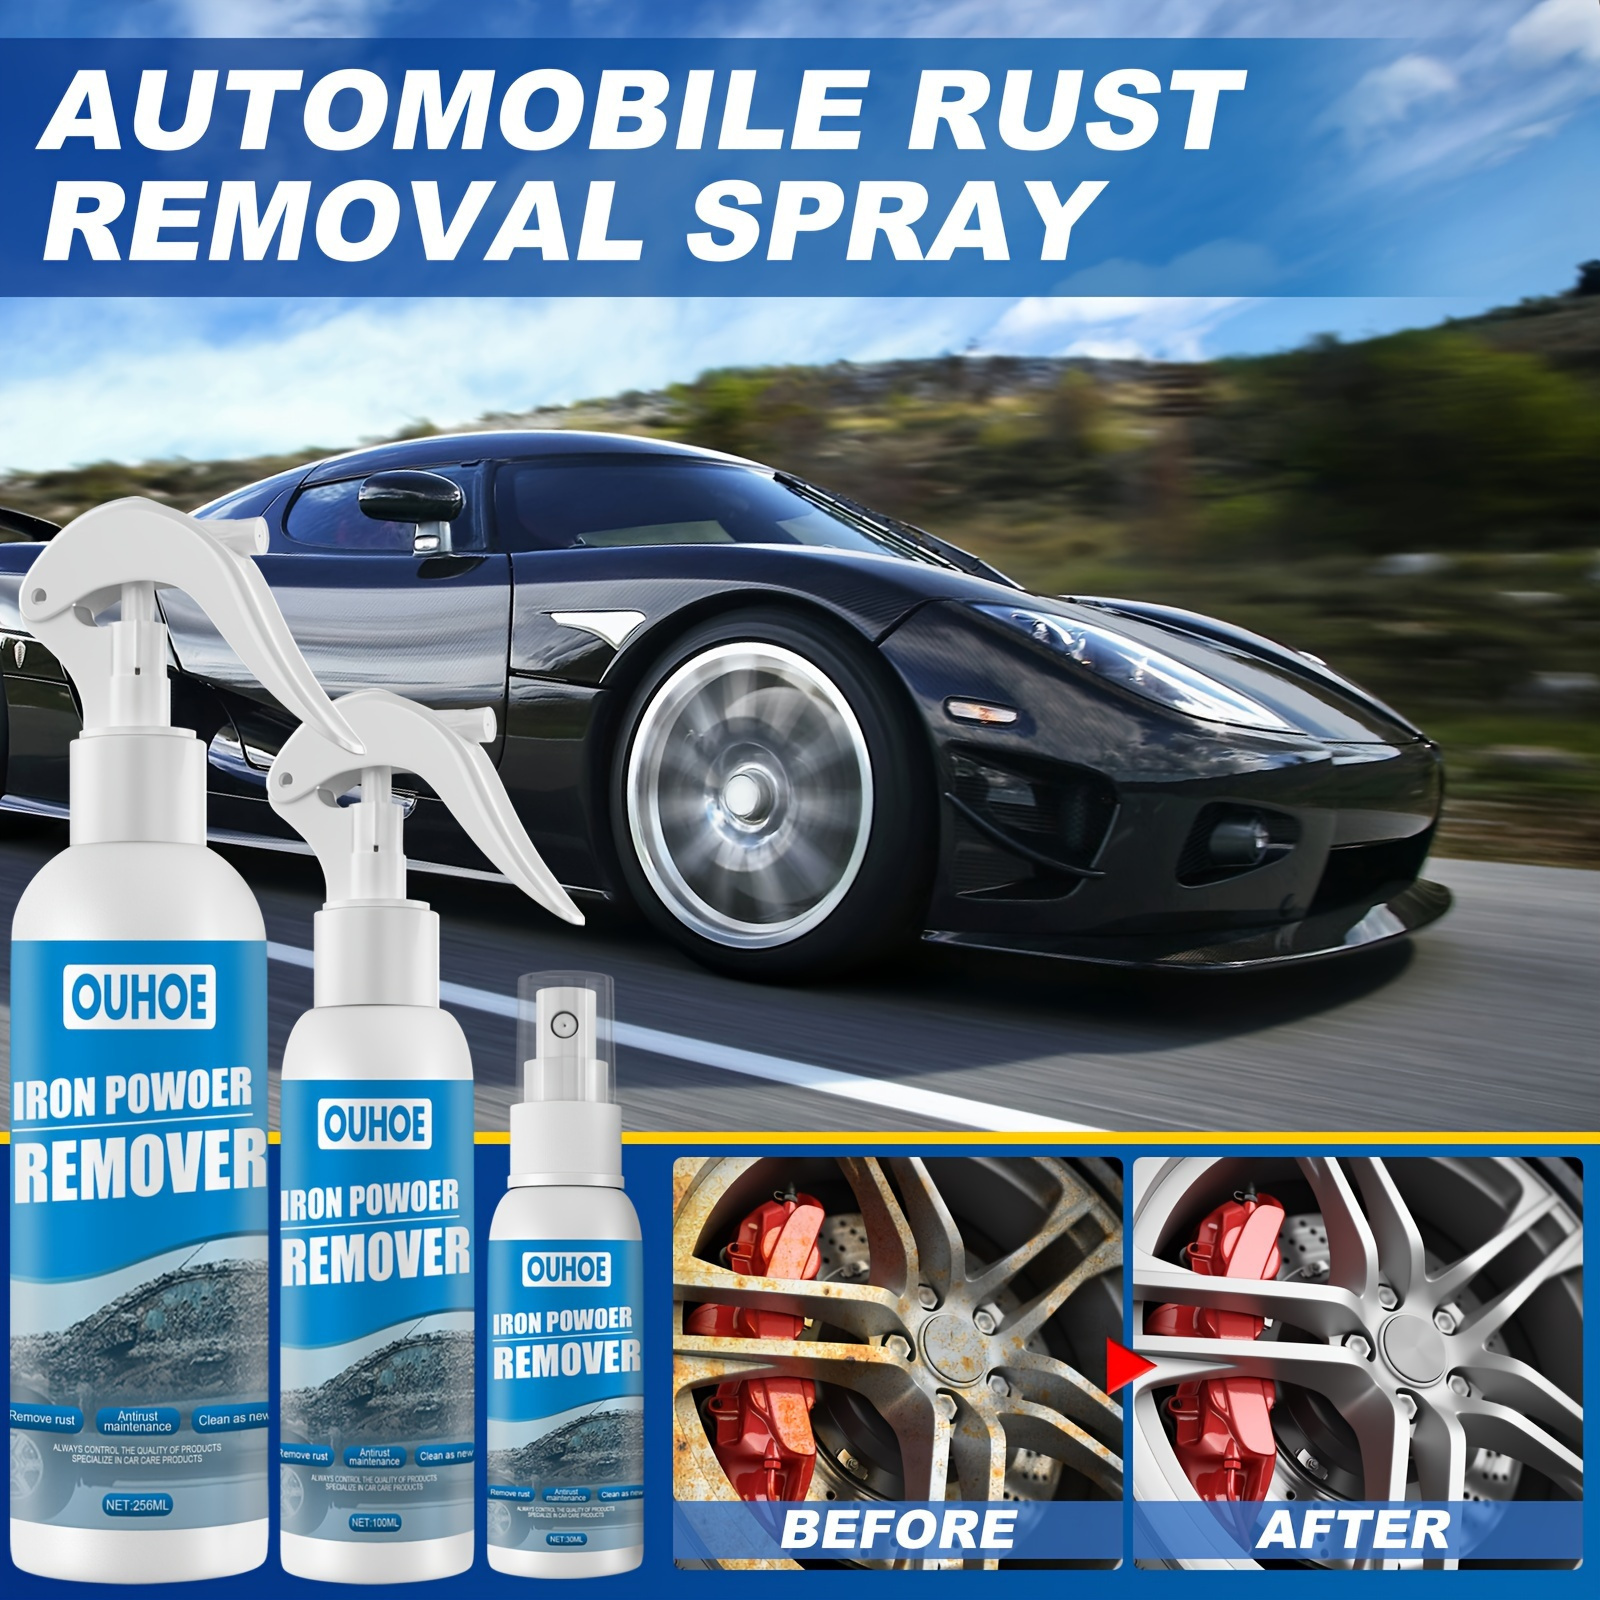 Rustout Instant Remover Spray 100ml - Rust Stain Remover - Easily Clean - for Metal Parts, Rollers, Door Hinges and Brake Parts, Anti Corrosion and An